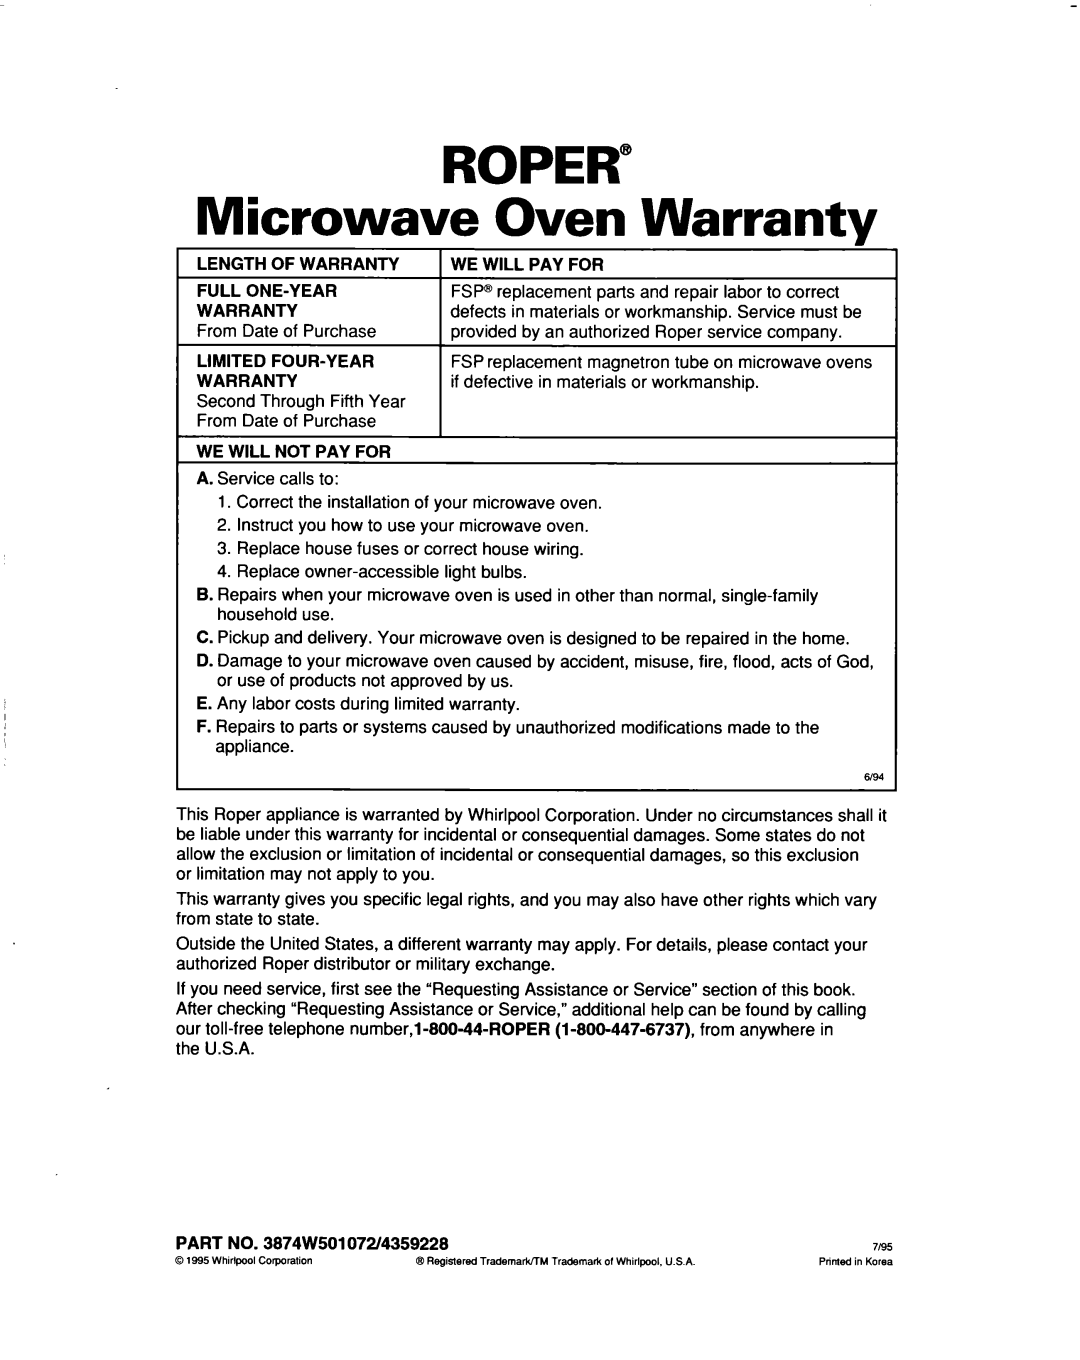 Whirlpool MHEI IRD warranty ROPER” Microwave Oven Warranty, r LENGTH OF WARRANTY 1 WE WILL PAY FOR, Full One-Year 